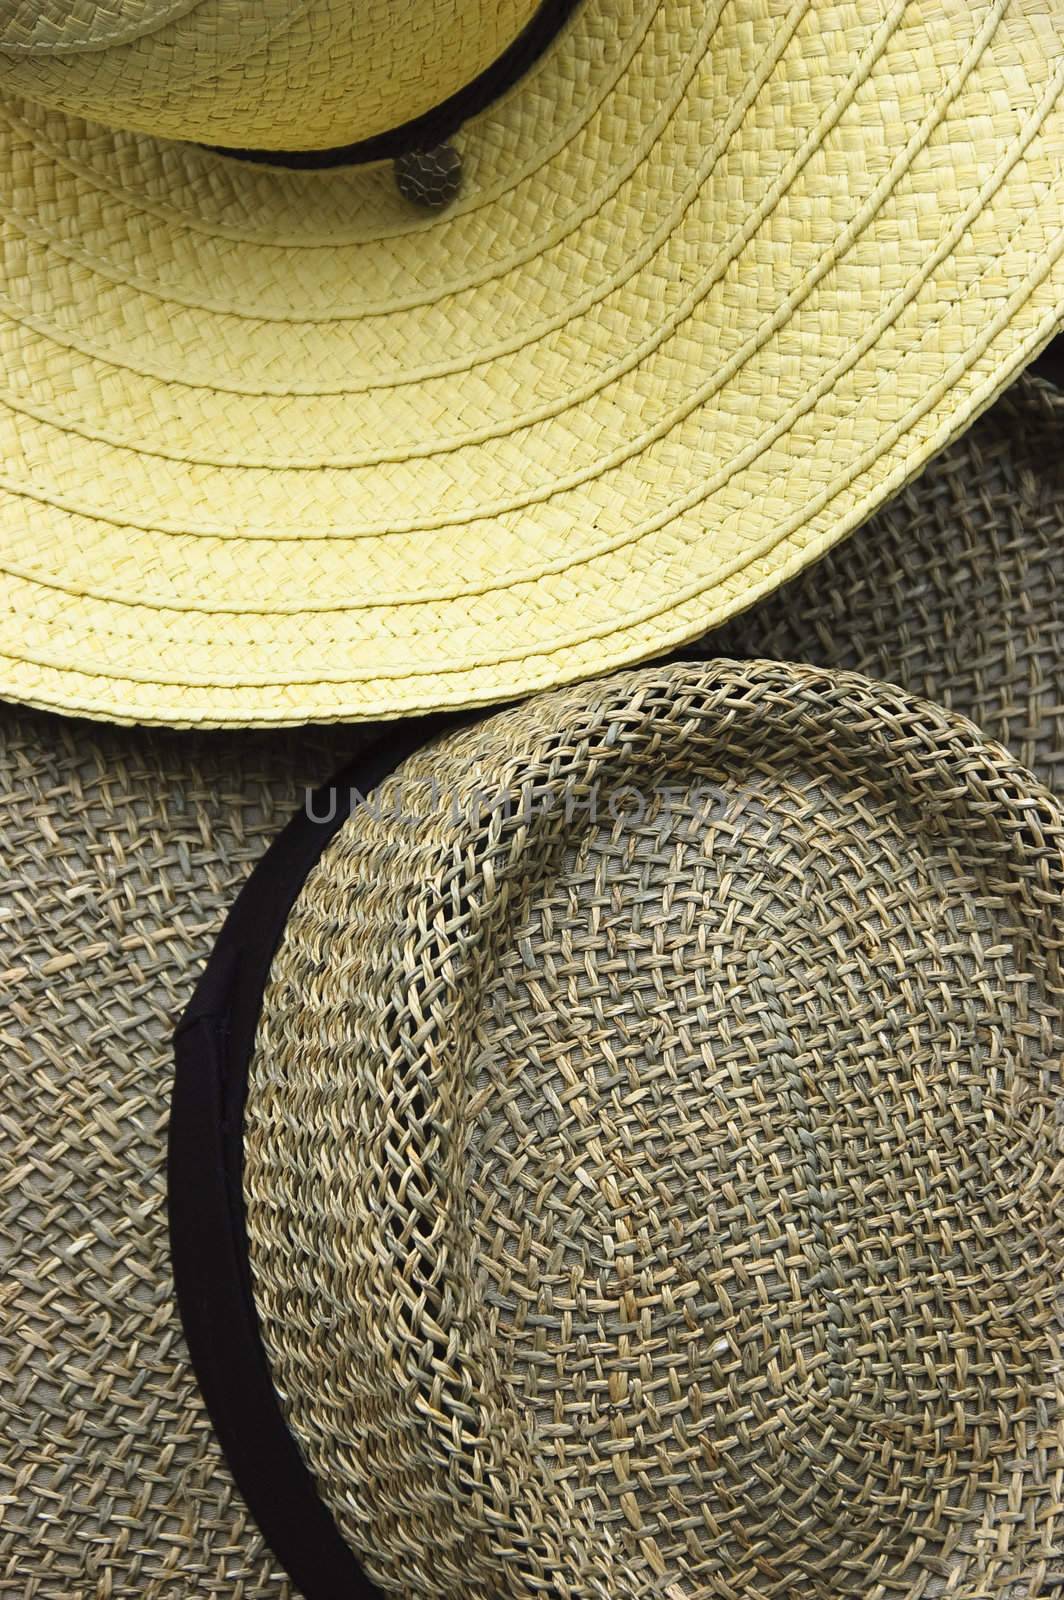 Close-up of two straw hats, one light yellow and the other dark brown